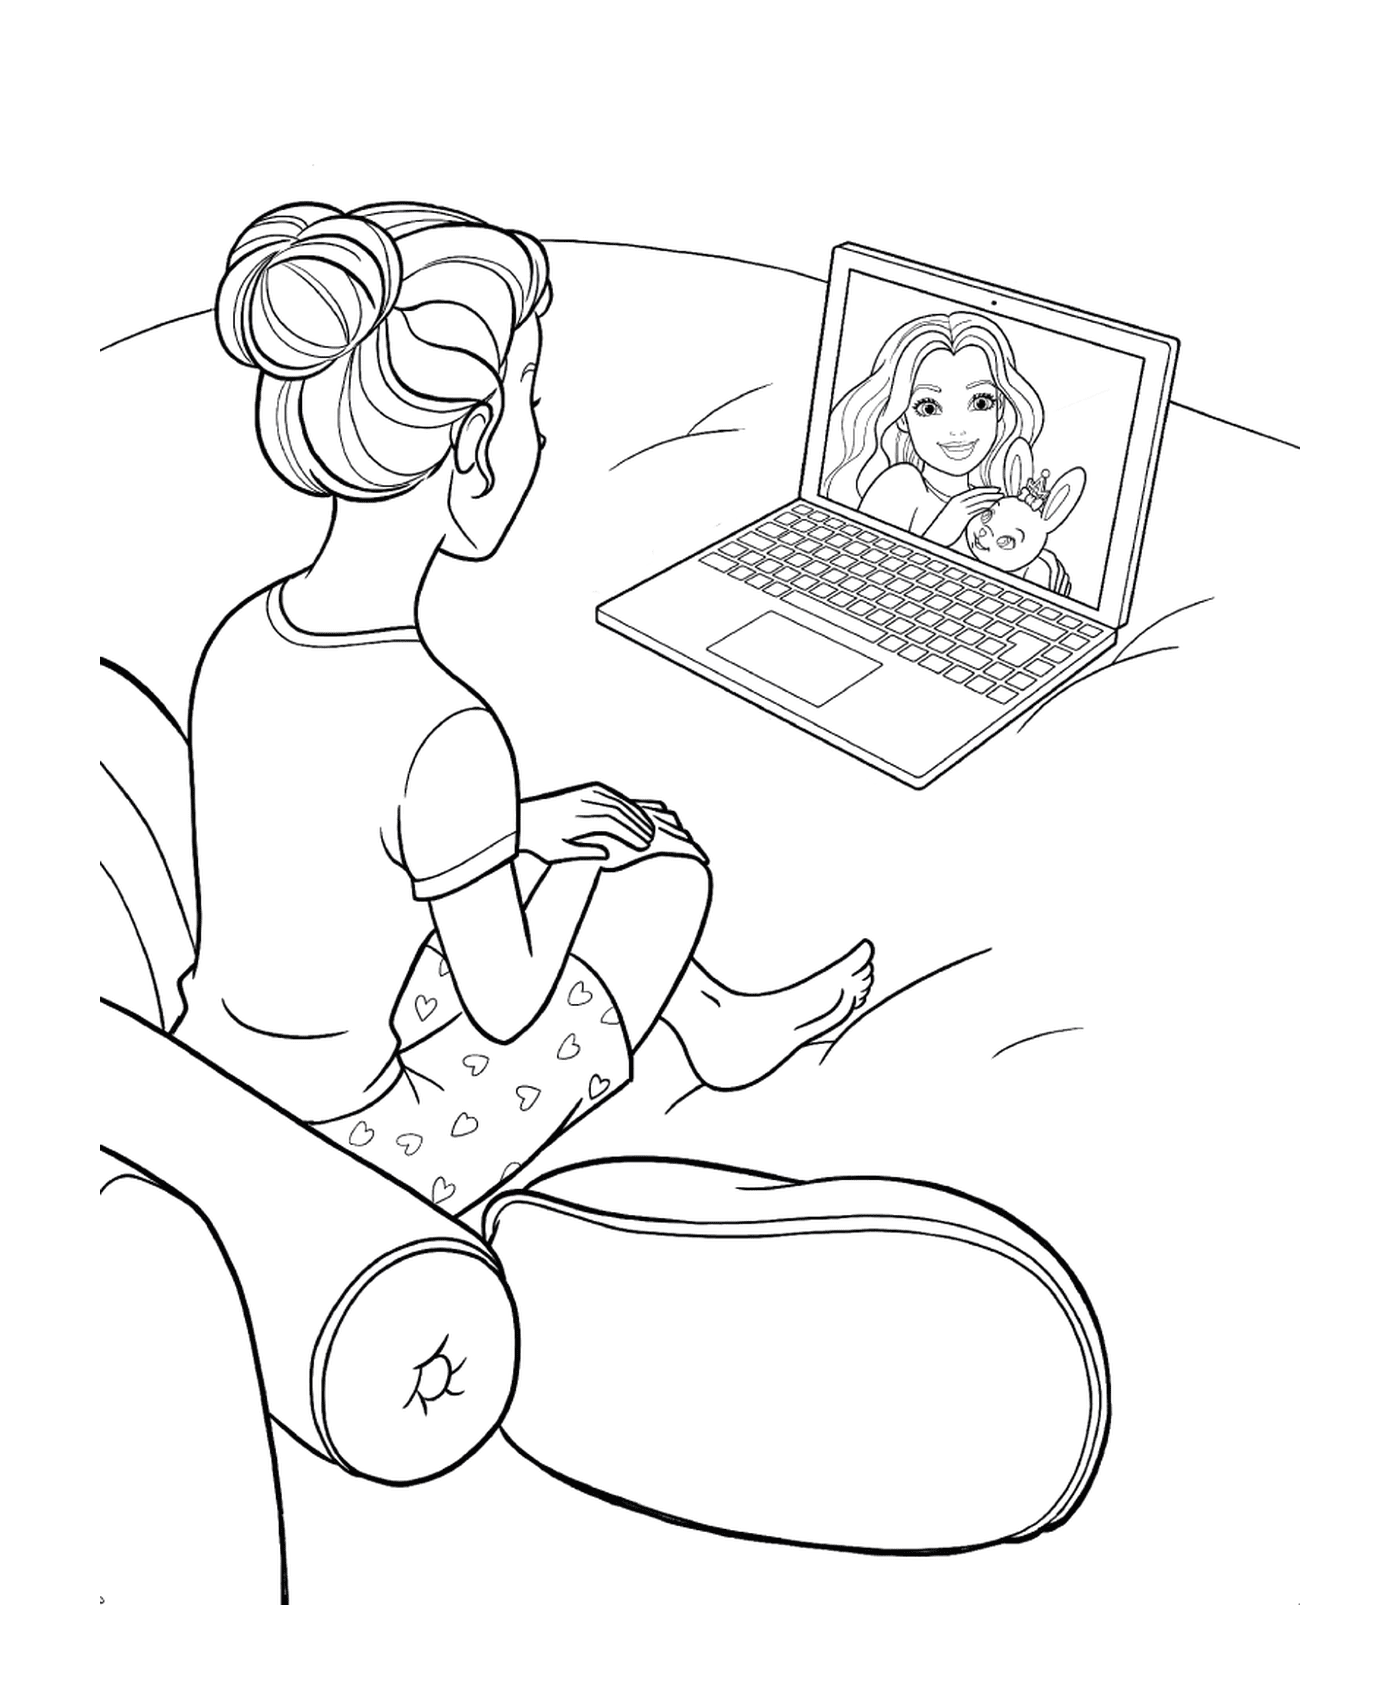  A woman sitting in front of a laptop 